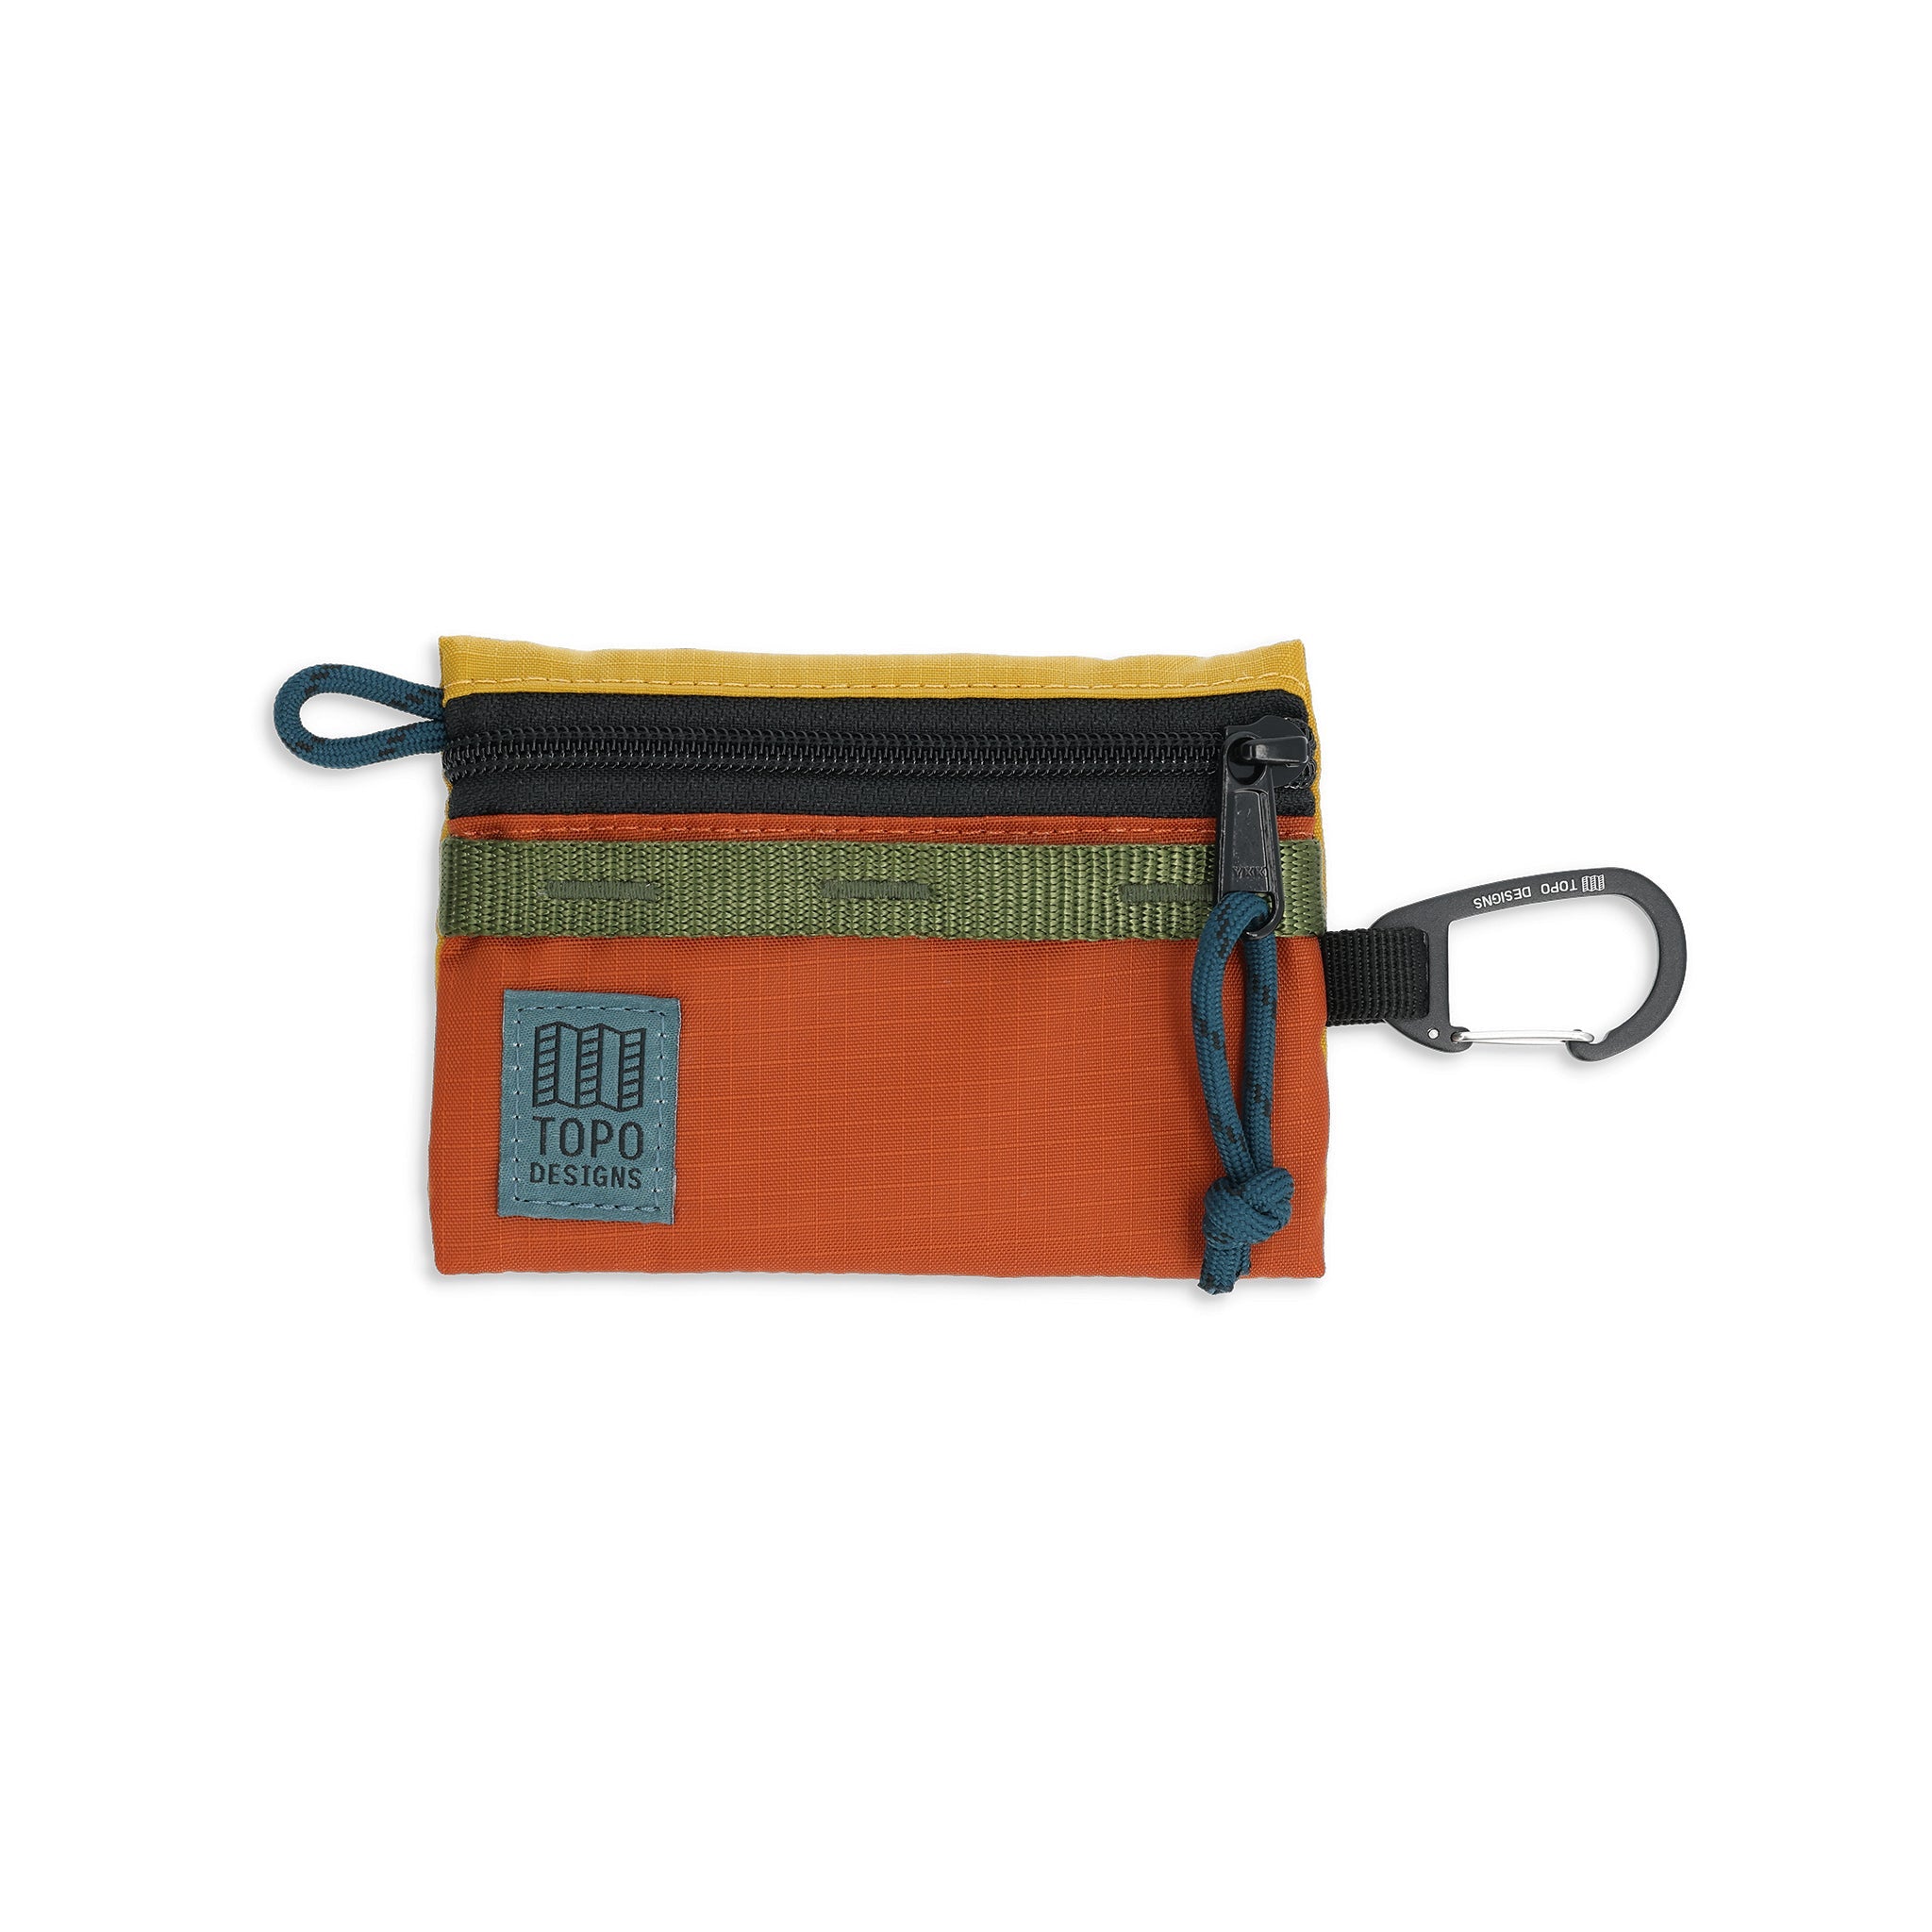 Front View of Topo Designs Mountain Accessory Bag in "Mustard / Clay"